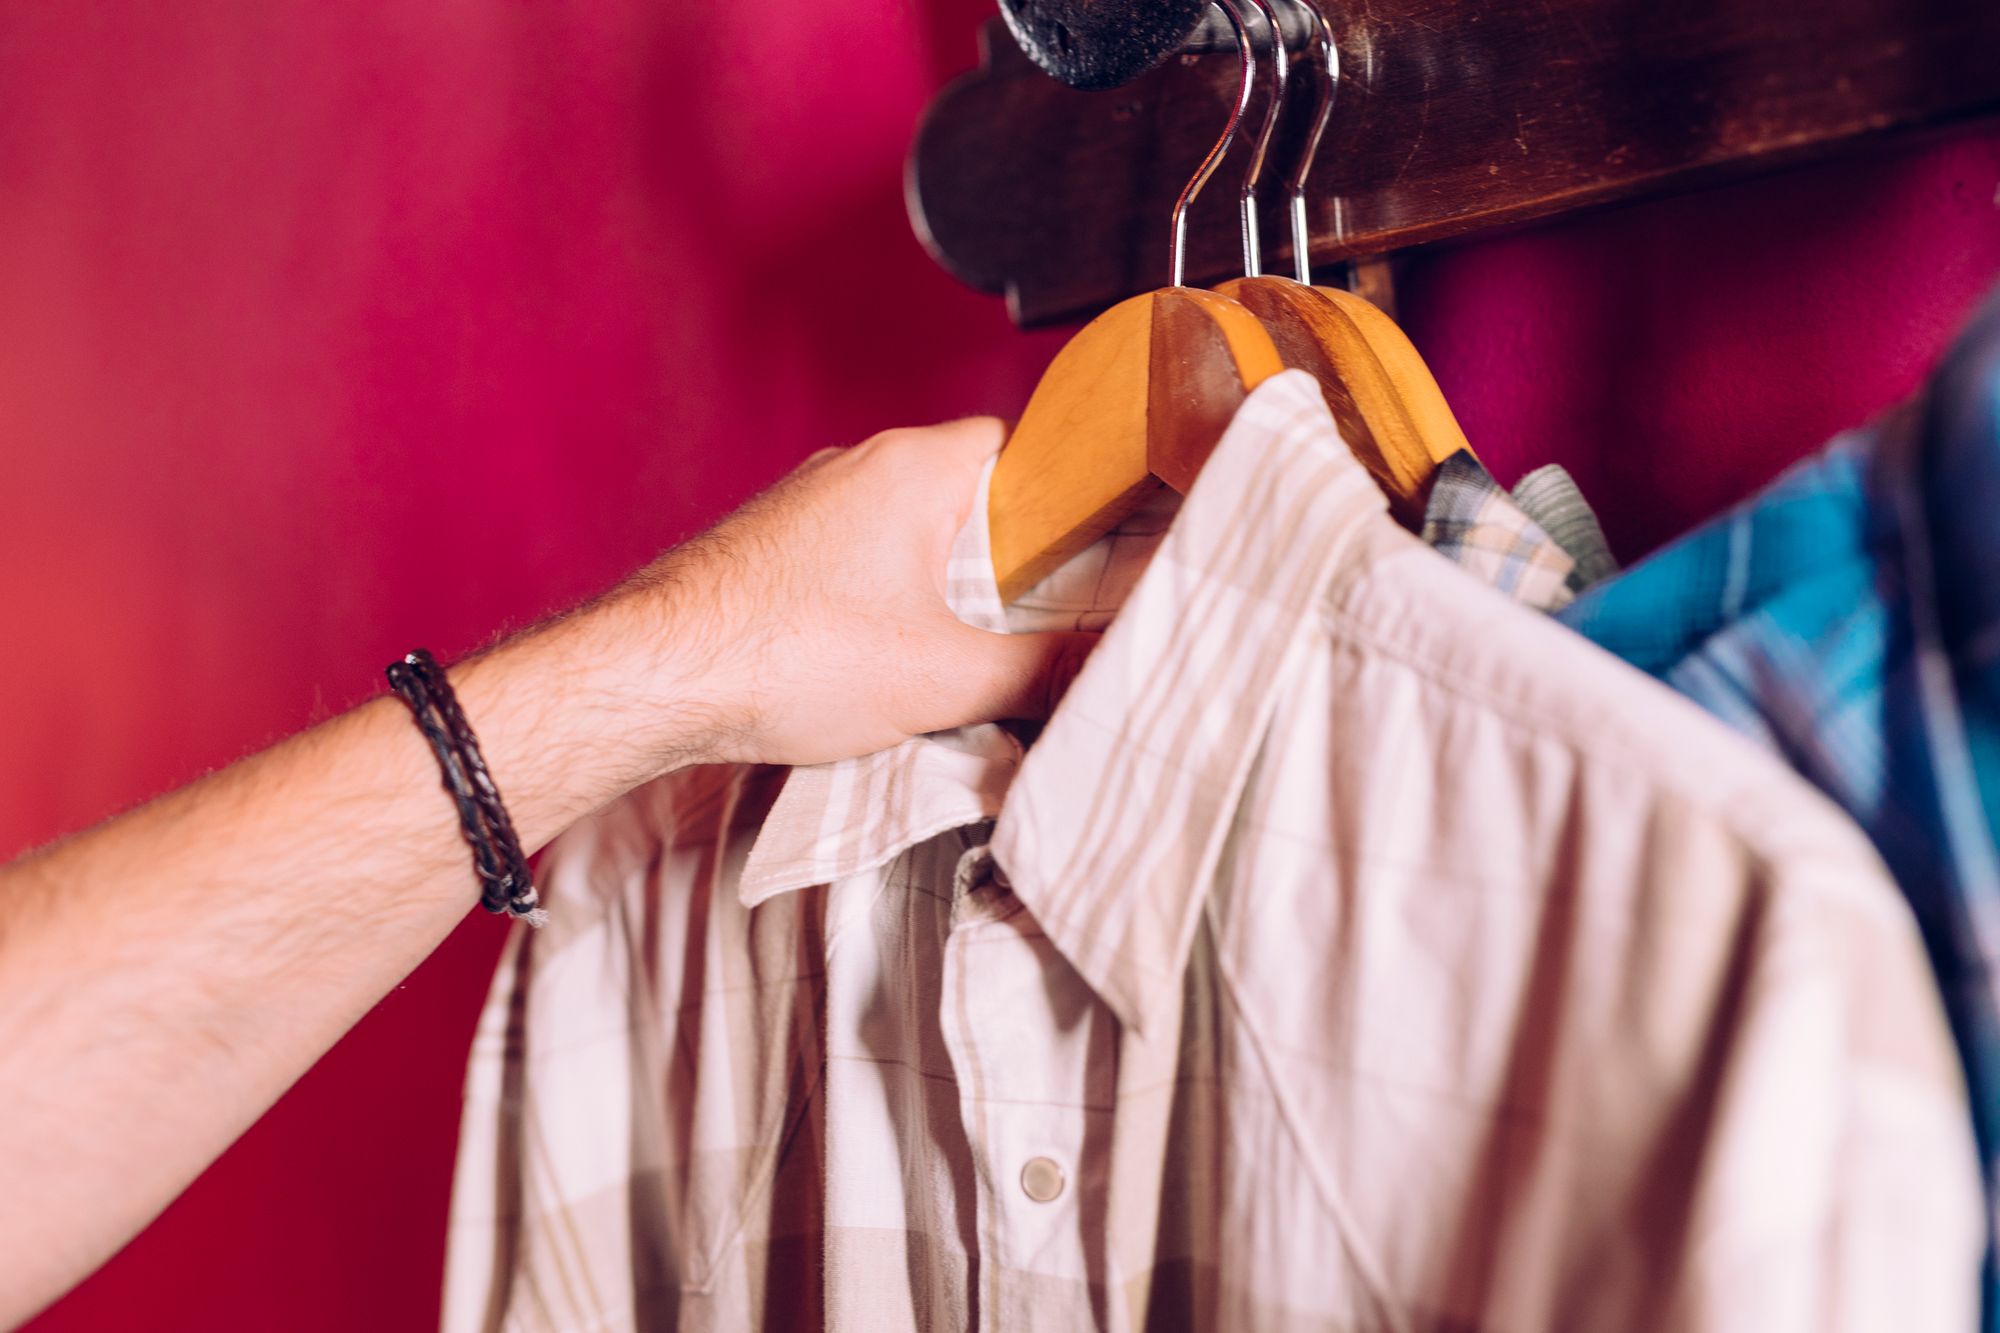 man-s-hand-taking-coat-hanger-shirt-from-rack-hook-red-wall